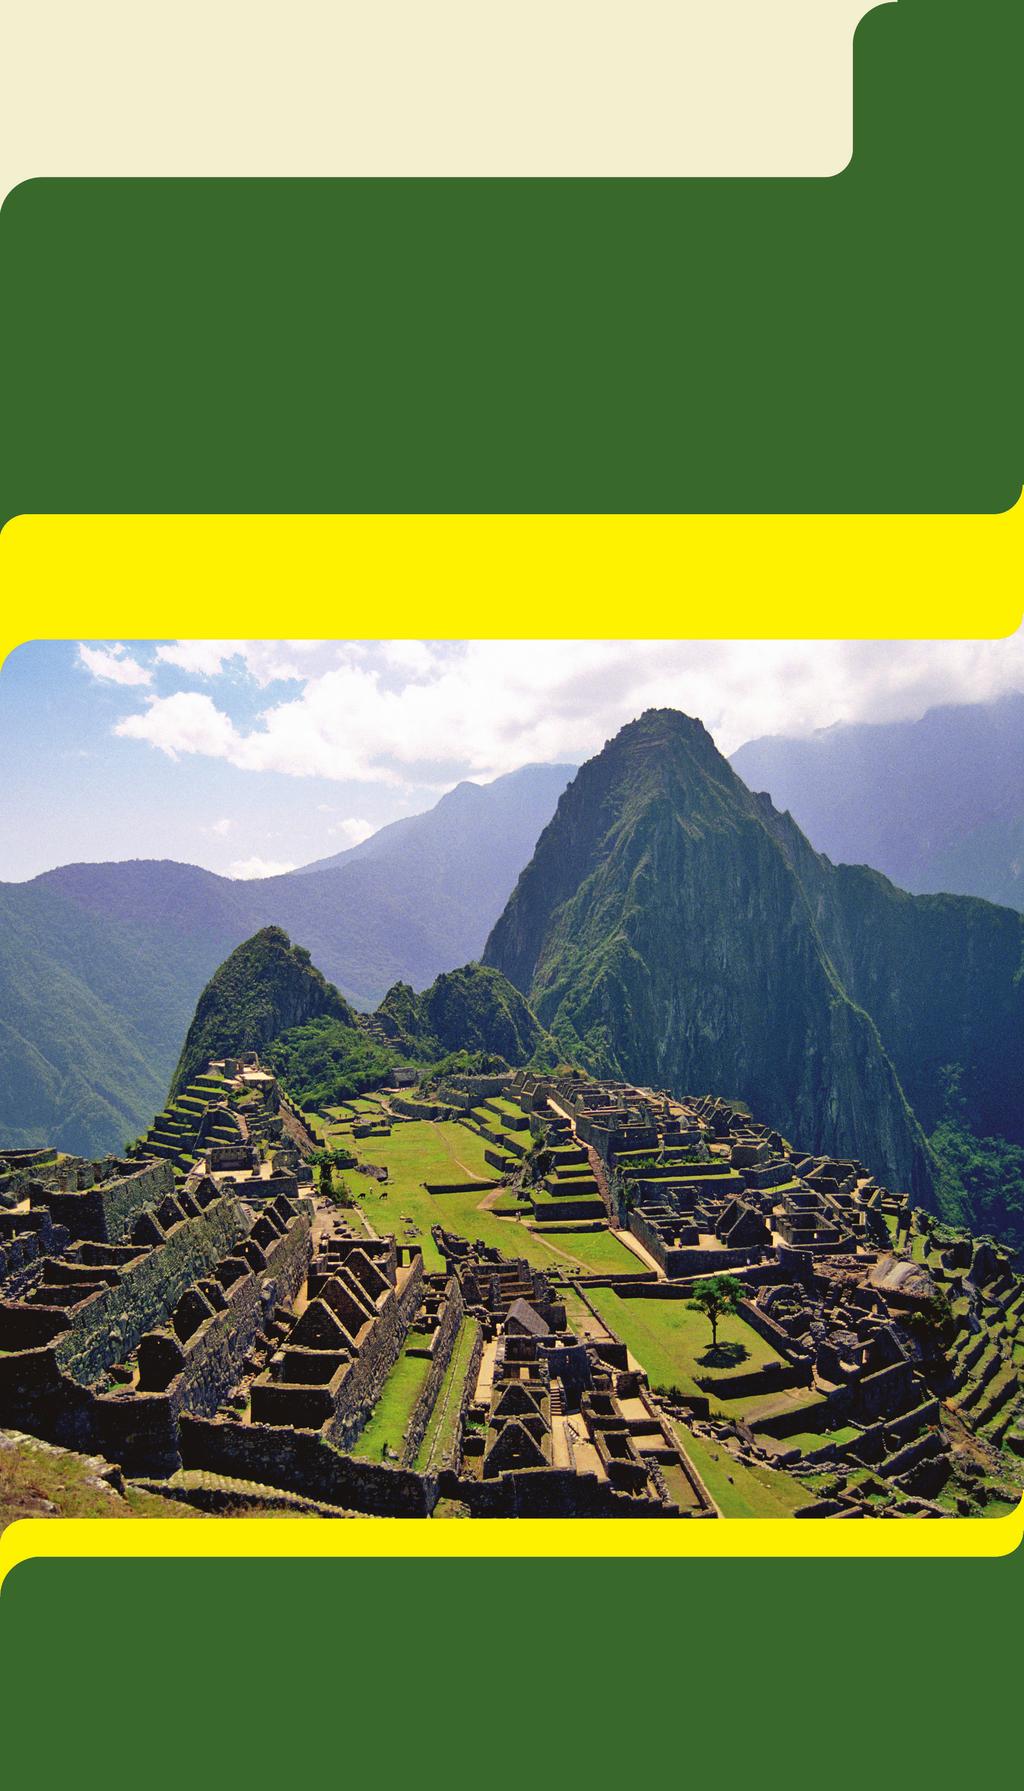 TREASURES OF PERU With Machu Picchu & Lake Titicaca February 13-23, 2017 11 days from $4,149 total price from Miami ($3,595 air & land inclusive plus $554 airline taxes and fees) This